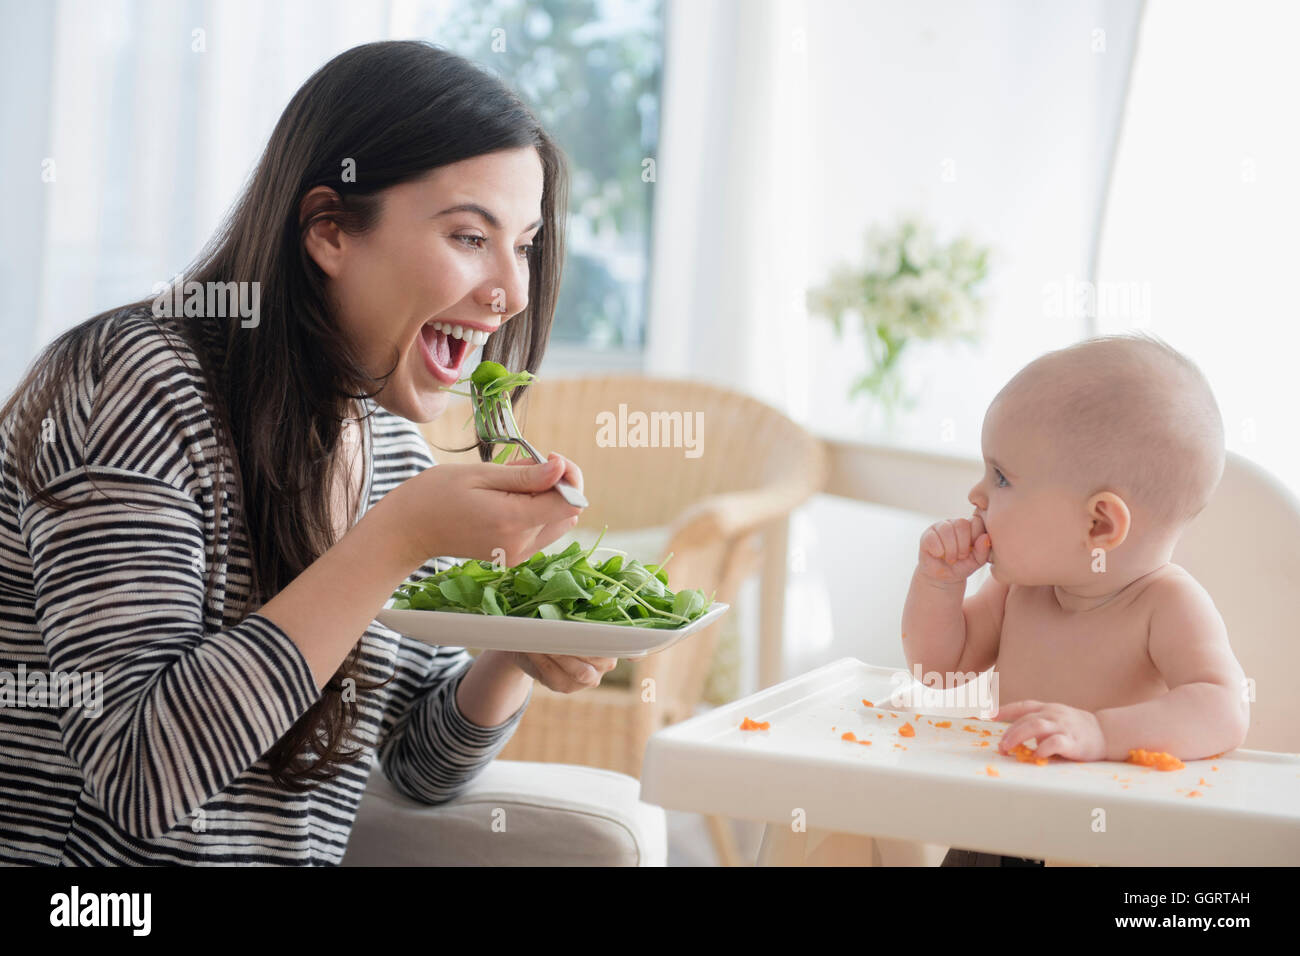 Caucasian woman eating salad while watching baby daughter Stock Photo